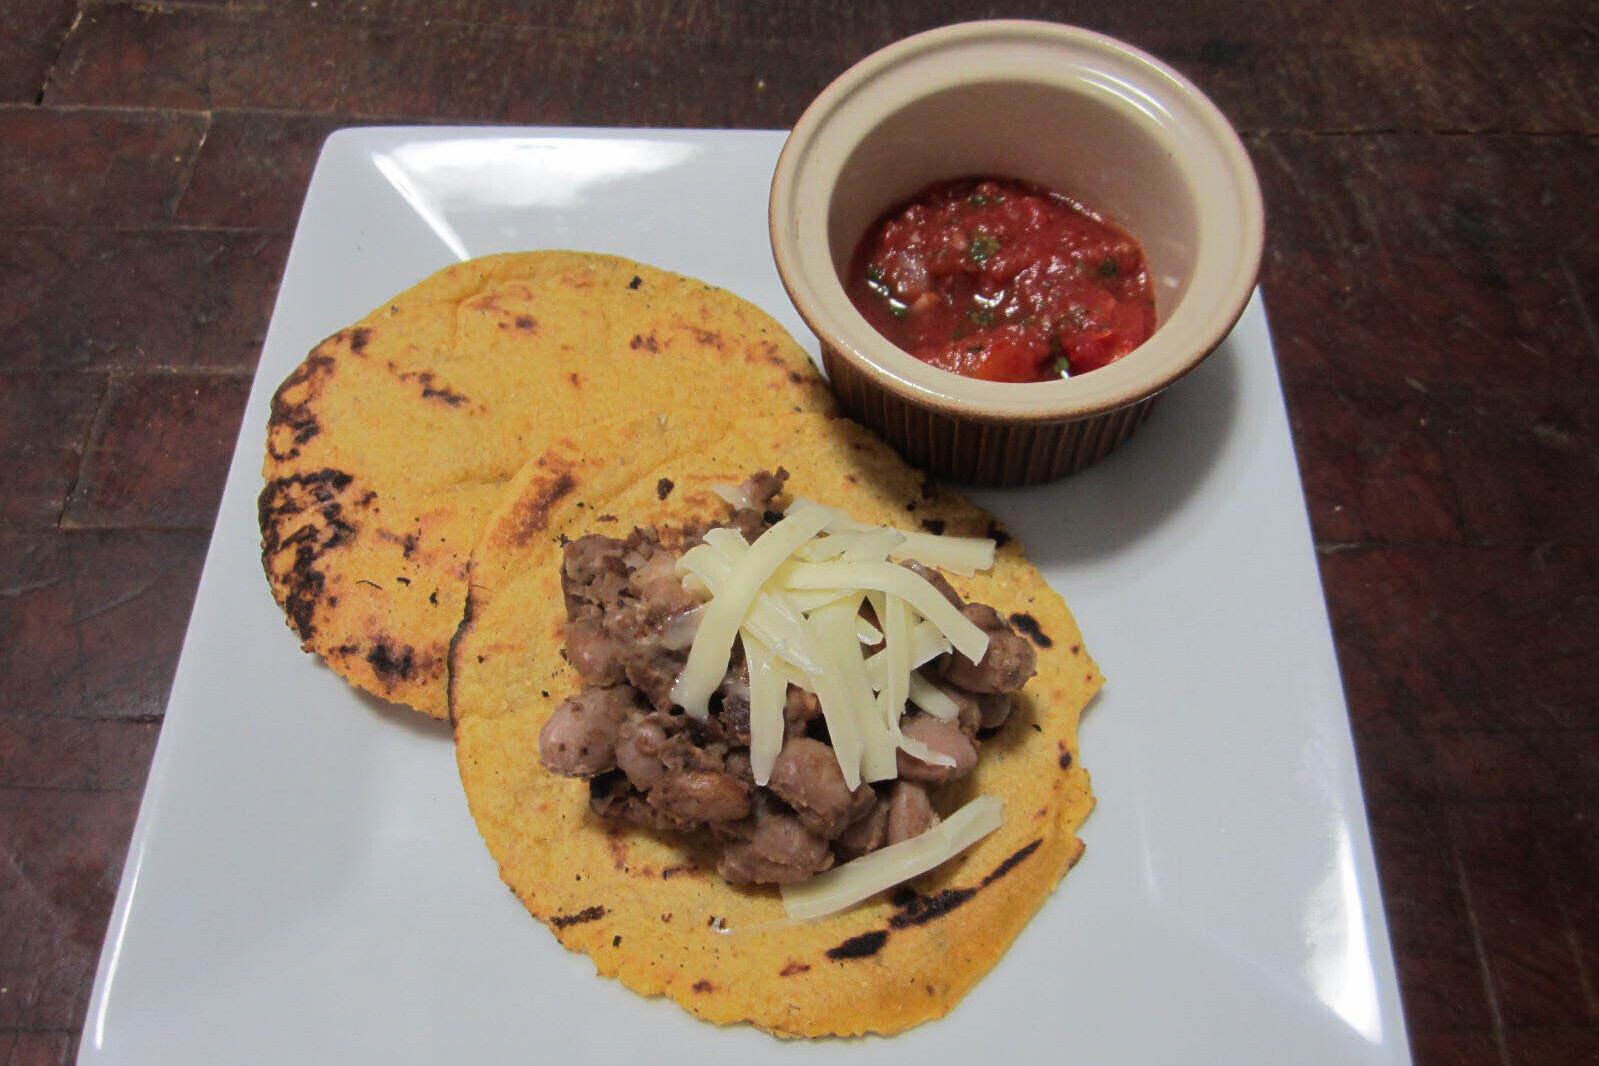 Tortillas with beans, cheese, and a side of tomato salsa